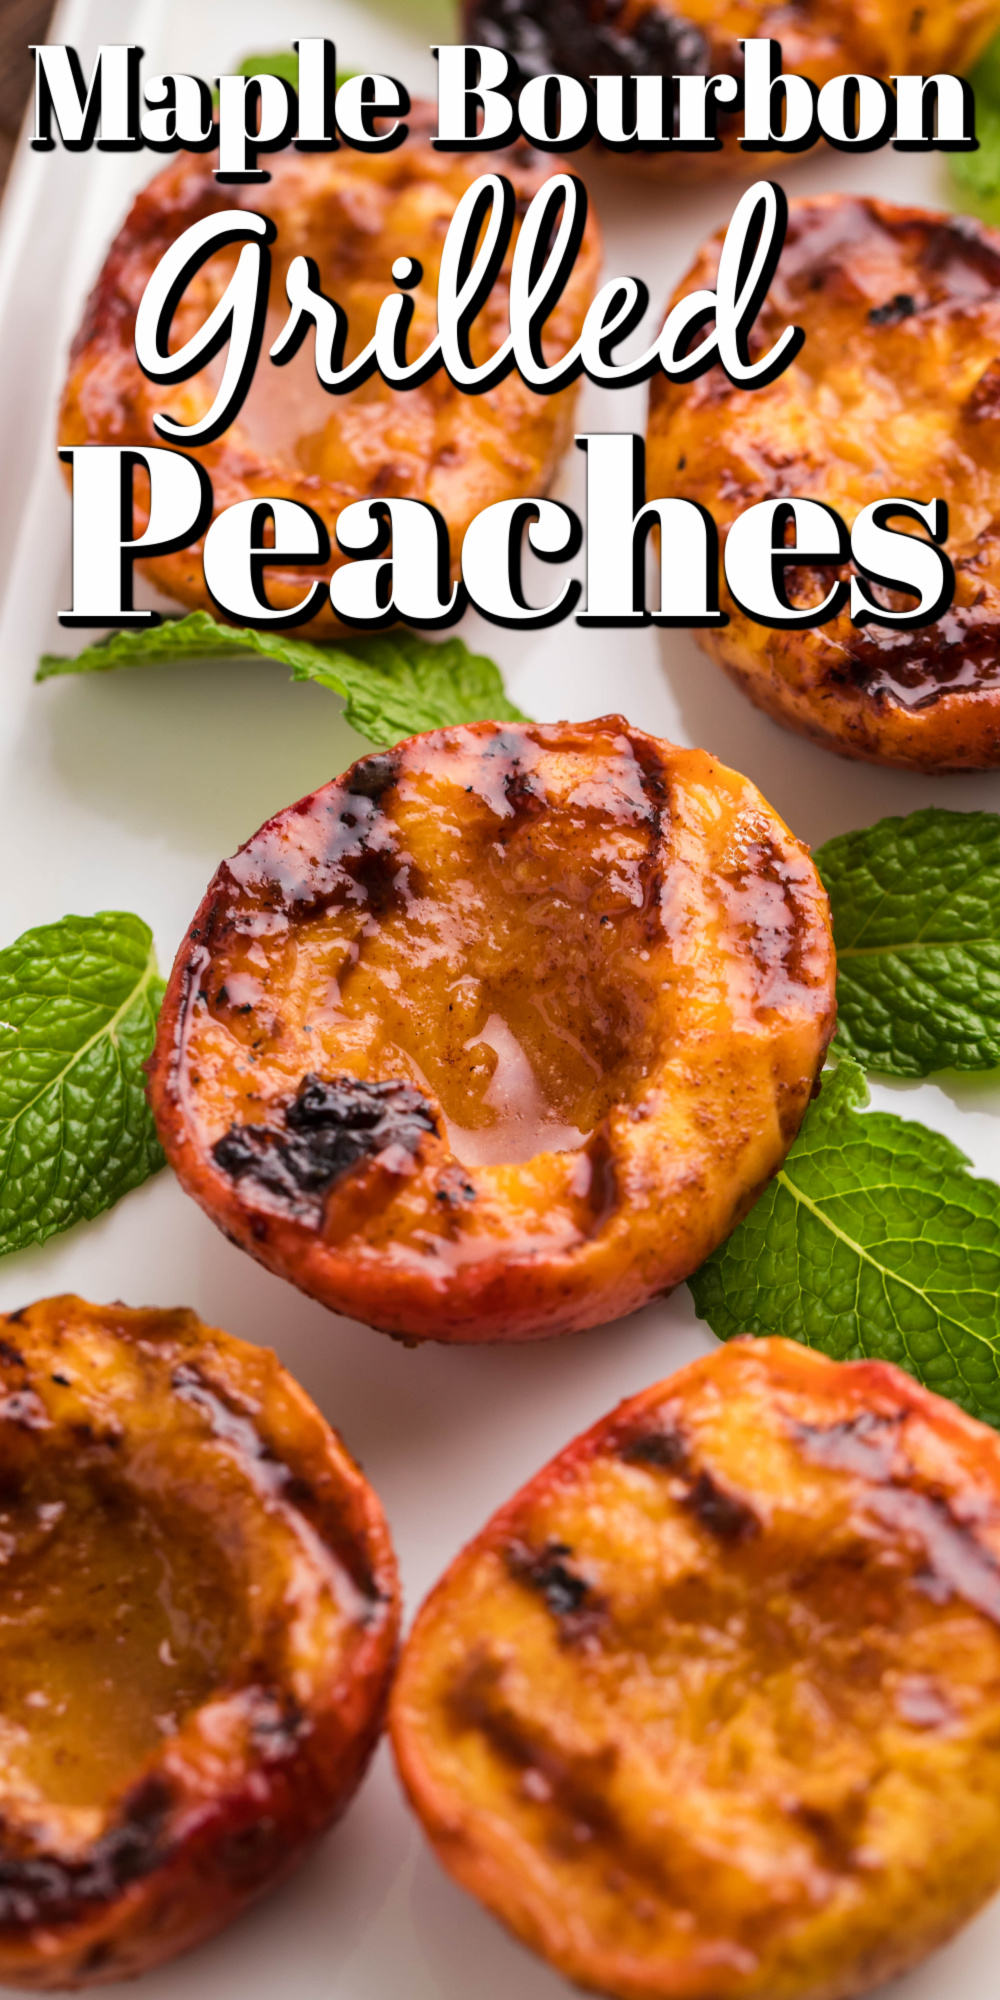 The maple syrup and brown sugar add additional sweetness to the grilled peaches, the cinnamon brings an earthy flavor and the bourbon adds the finishing touch!